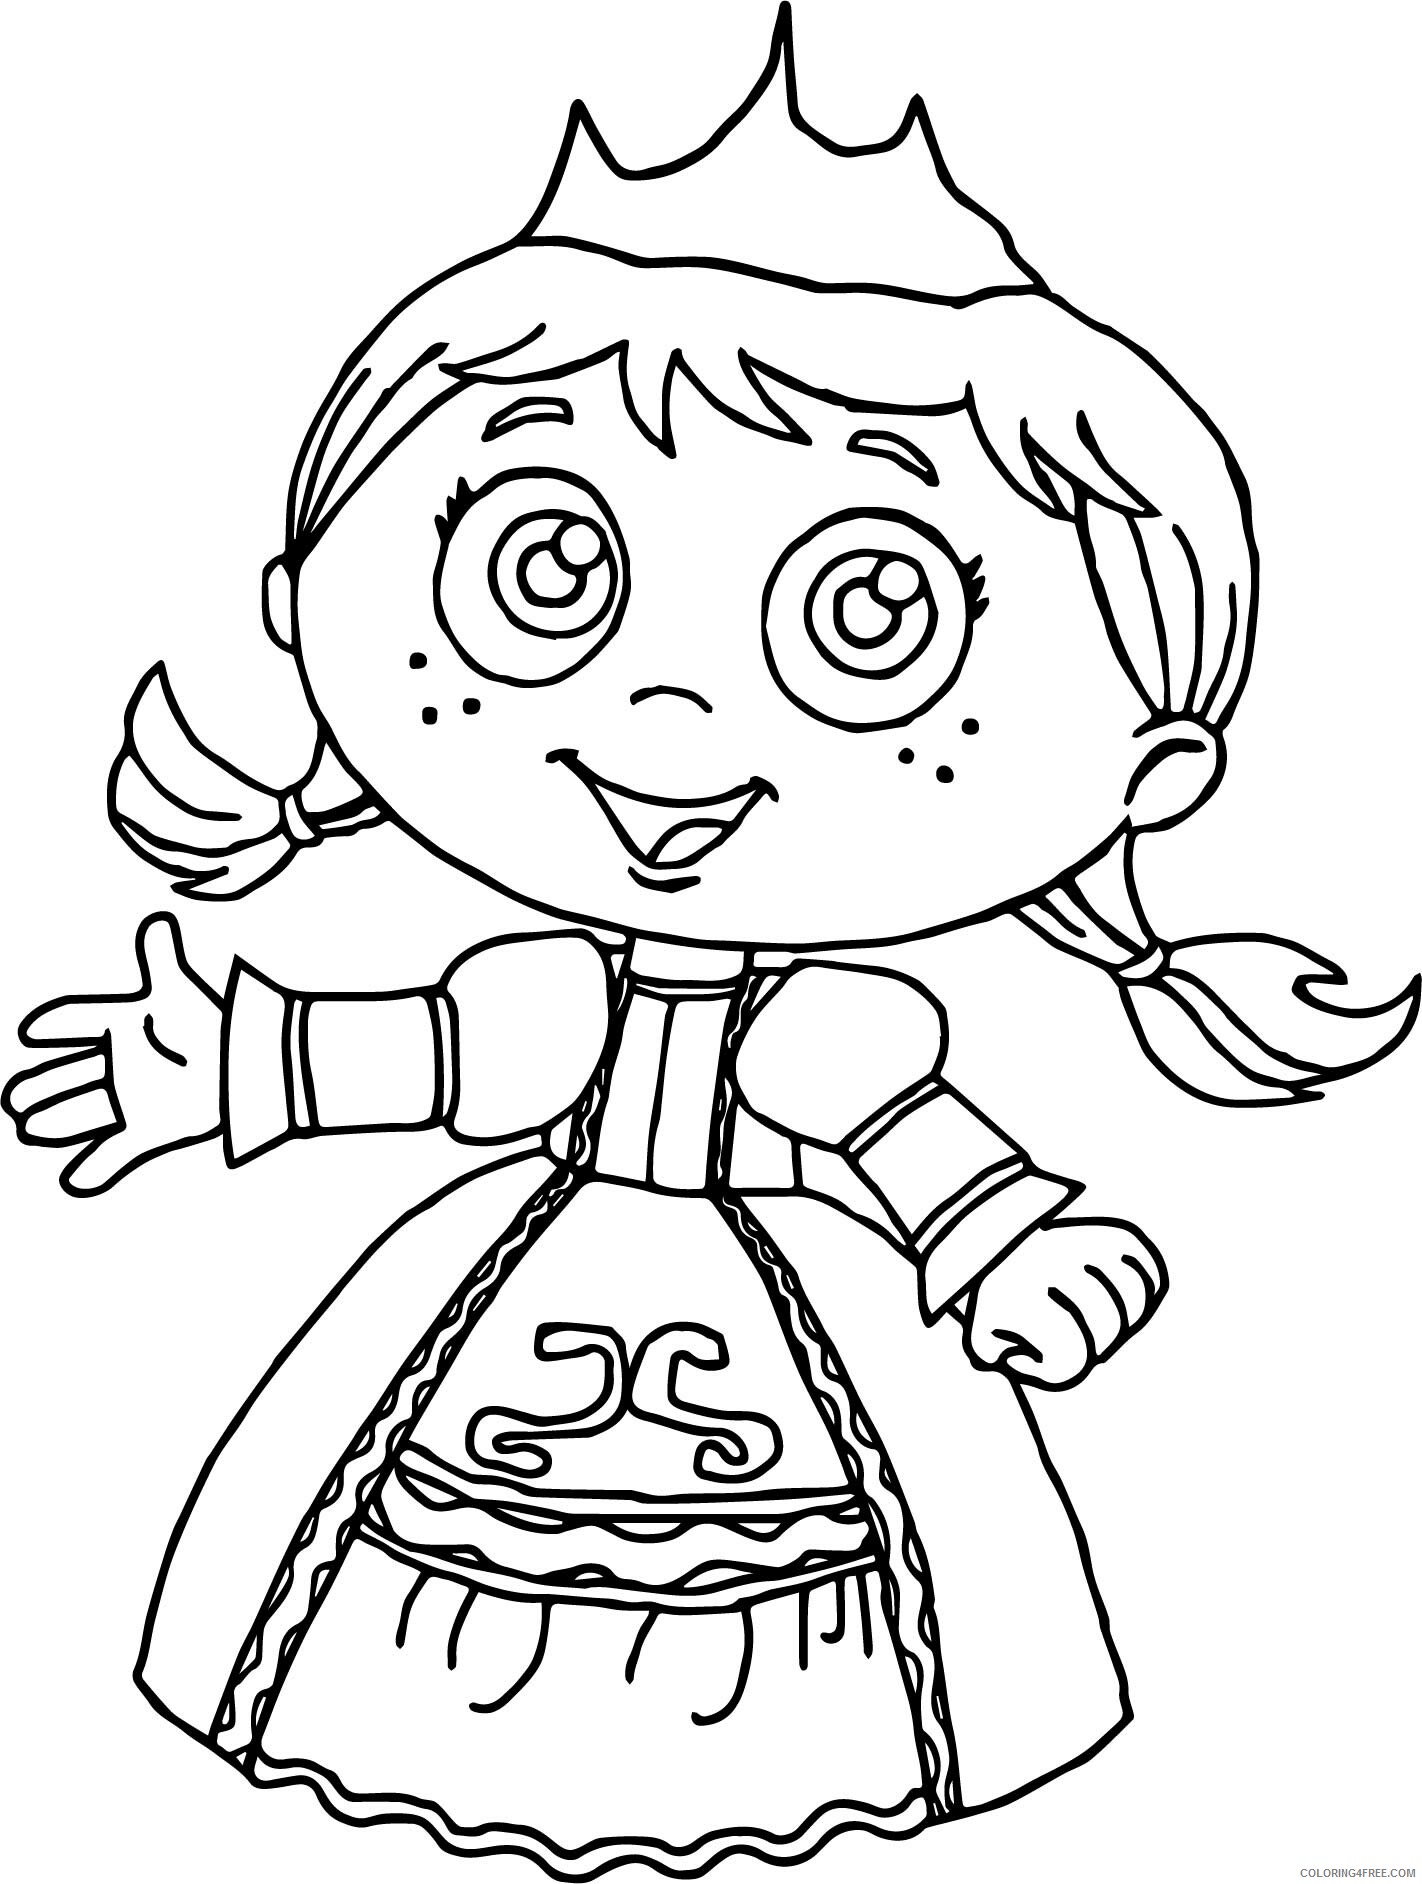 Super Why Coloring Pages TV Film Free Super Why Printable 2020 08304 Coloring4free